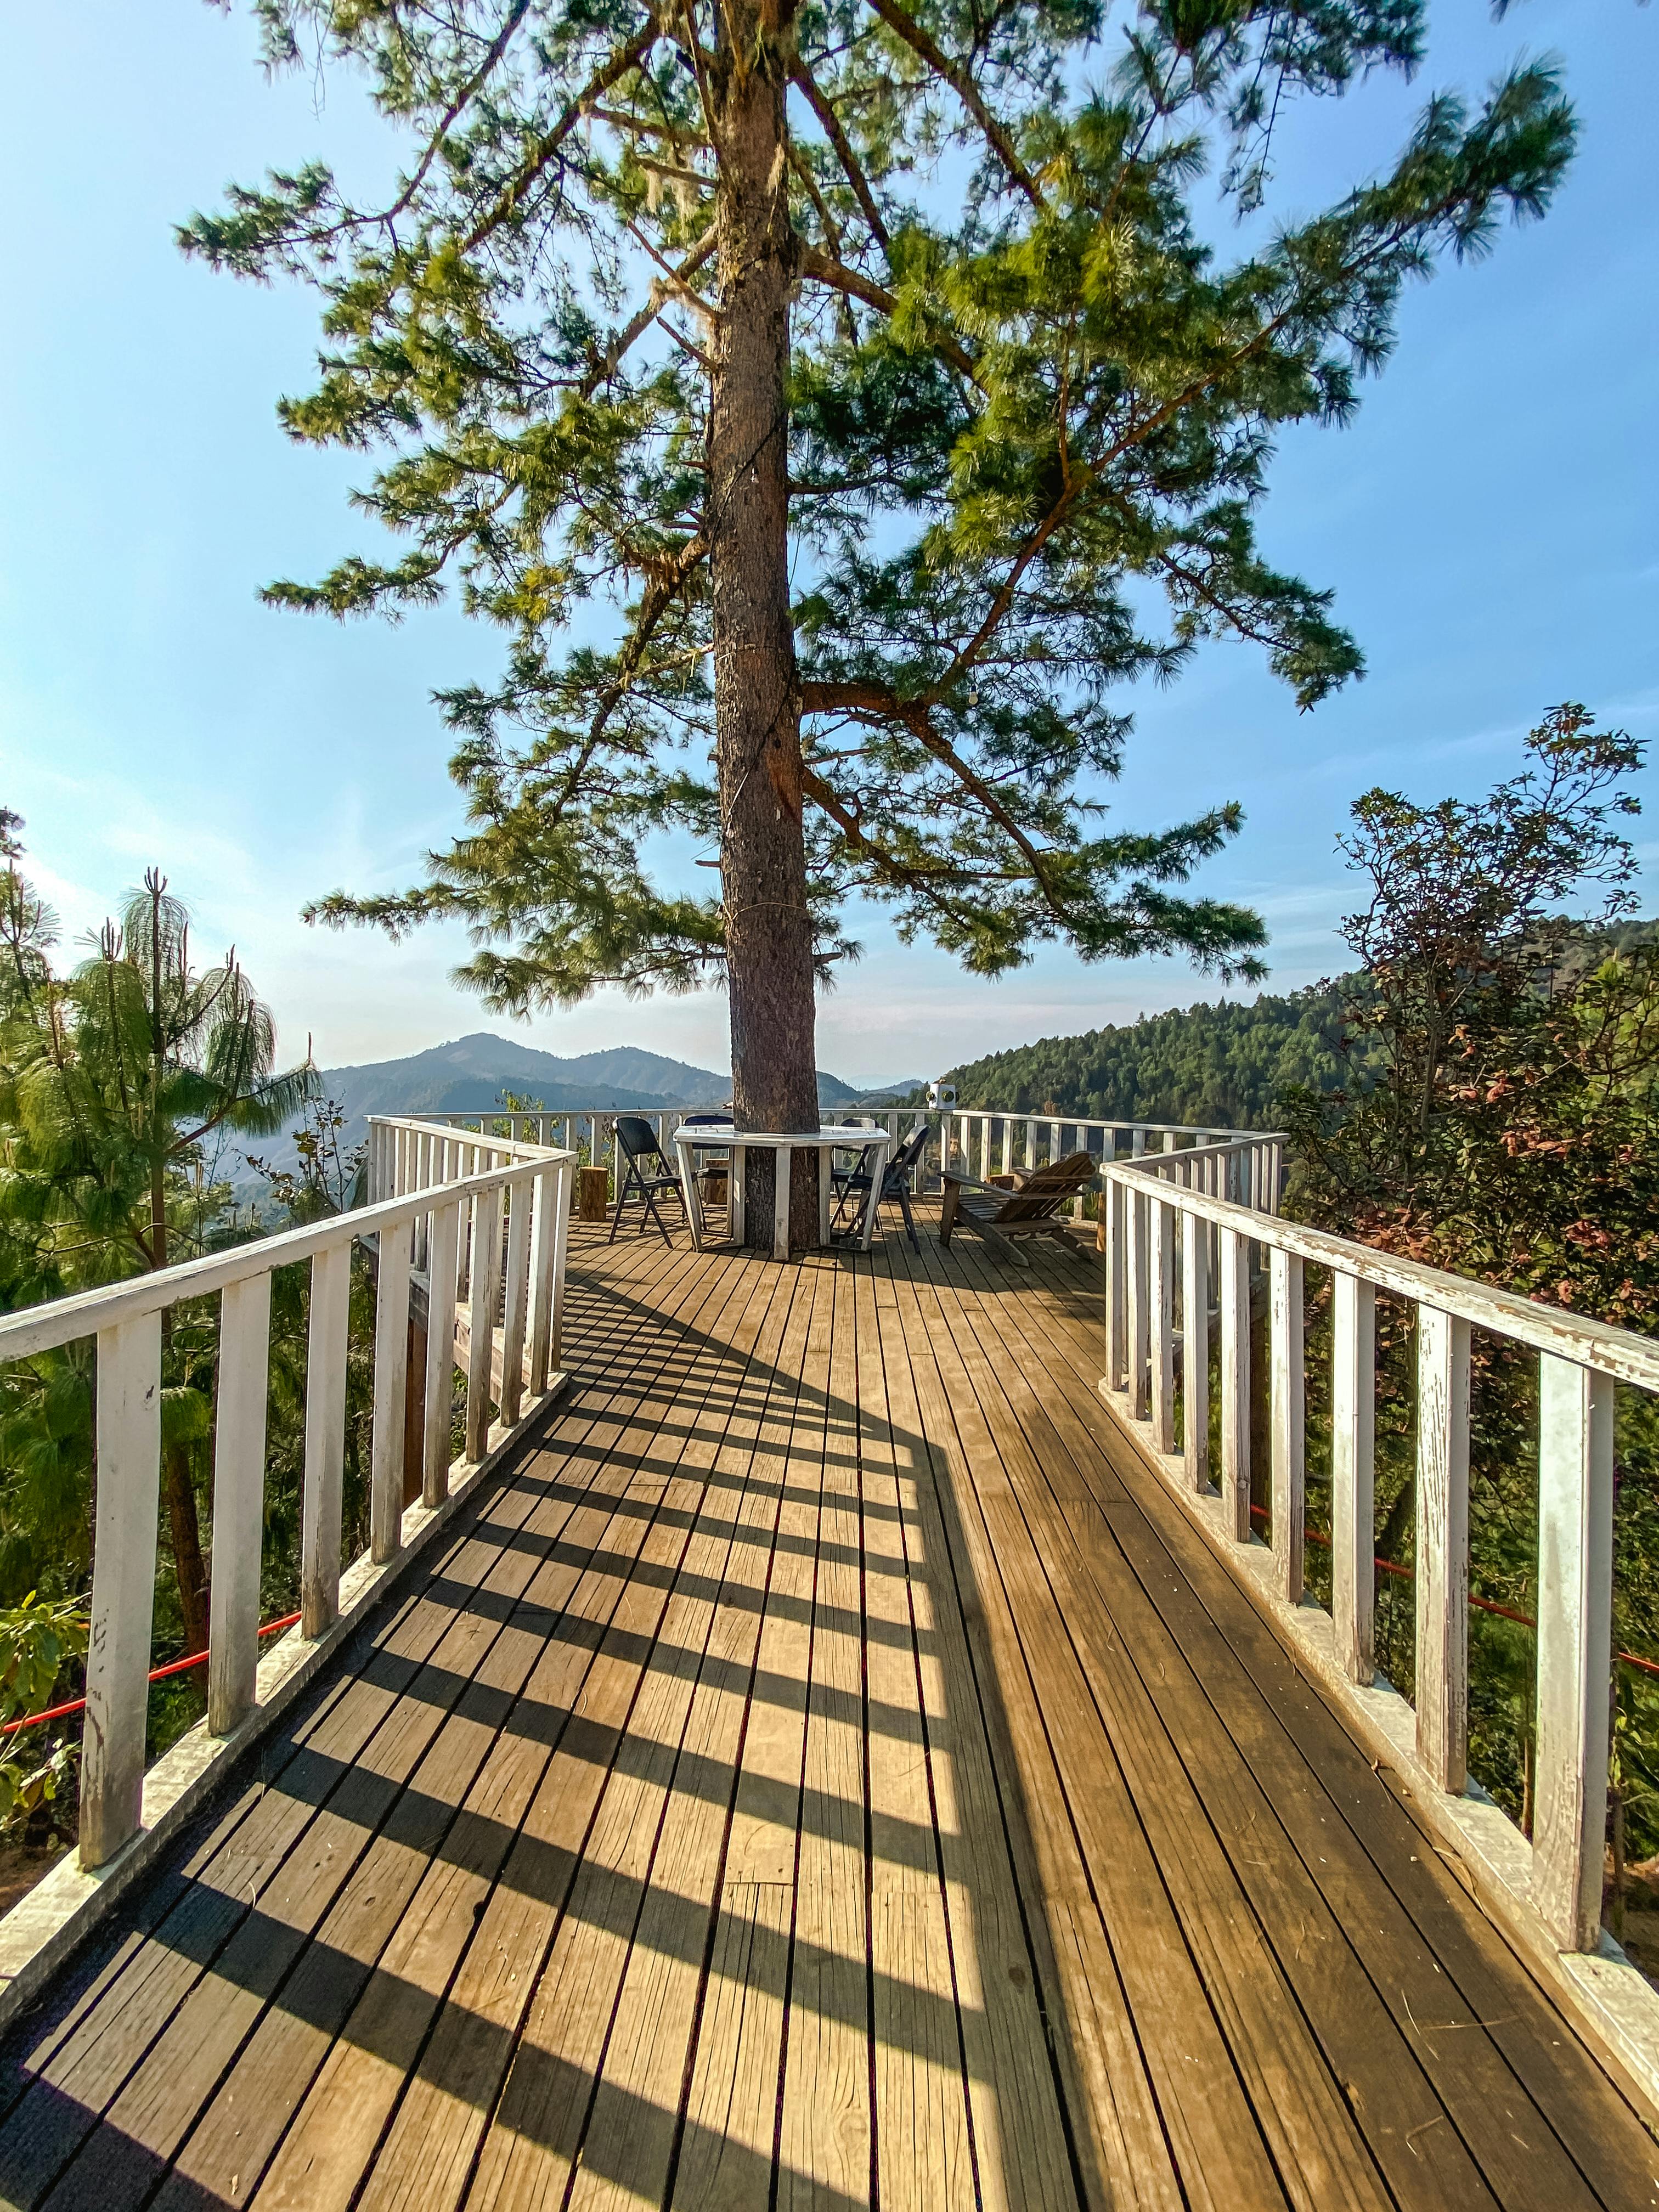 a walkway leading to a tree at a scenic deck